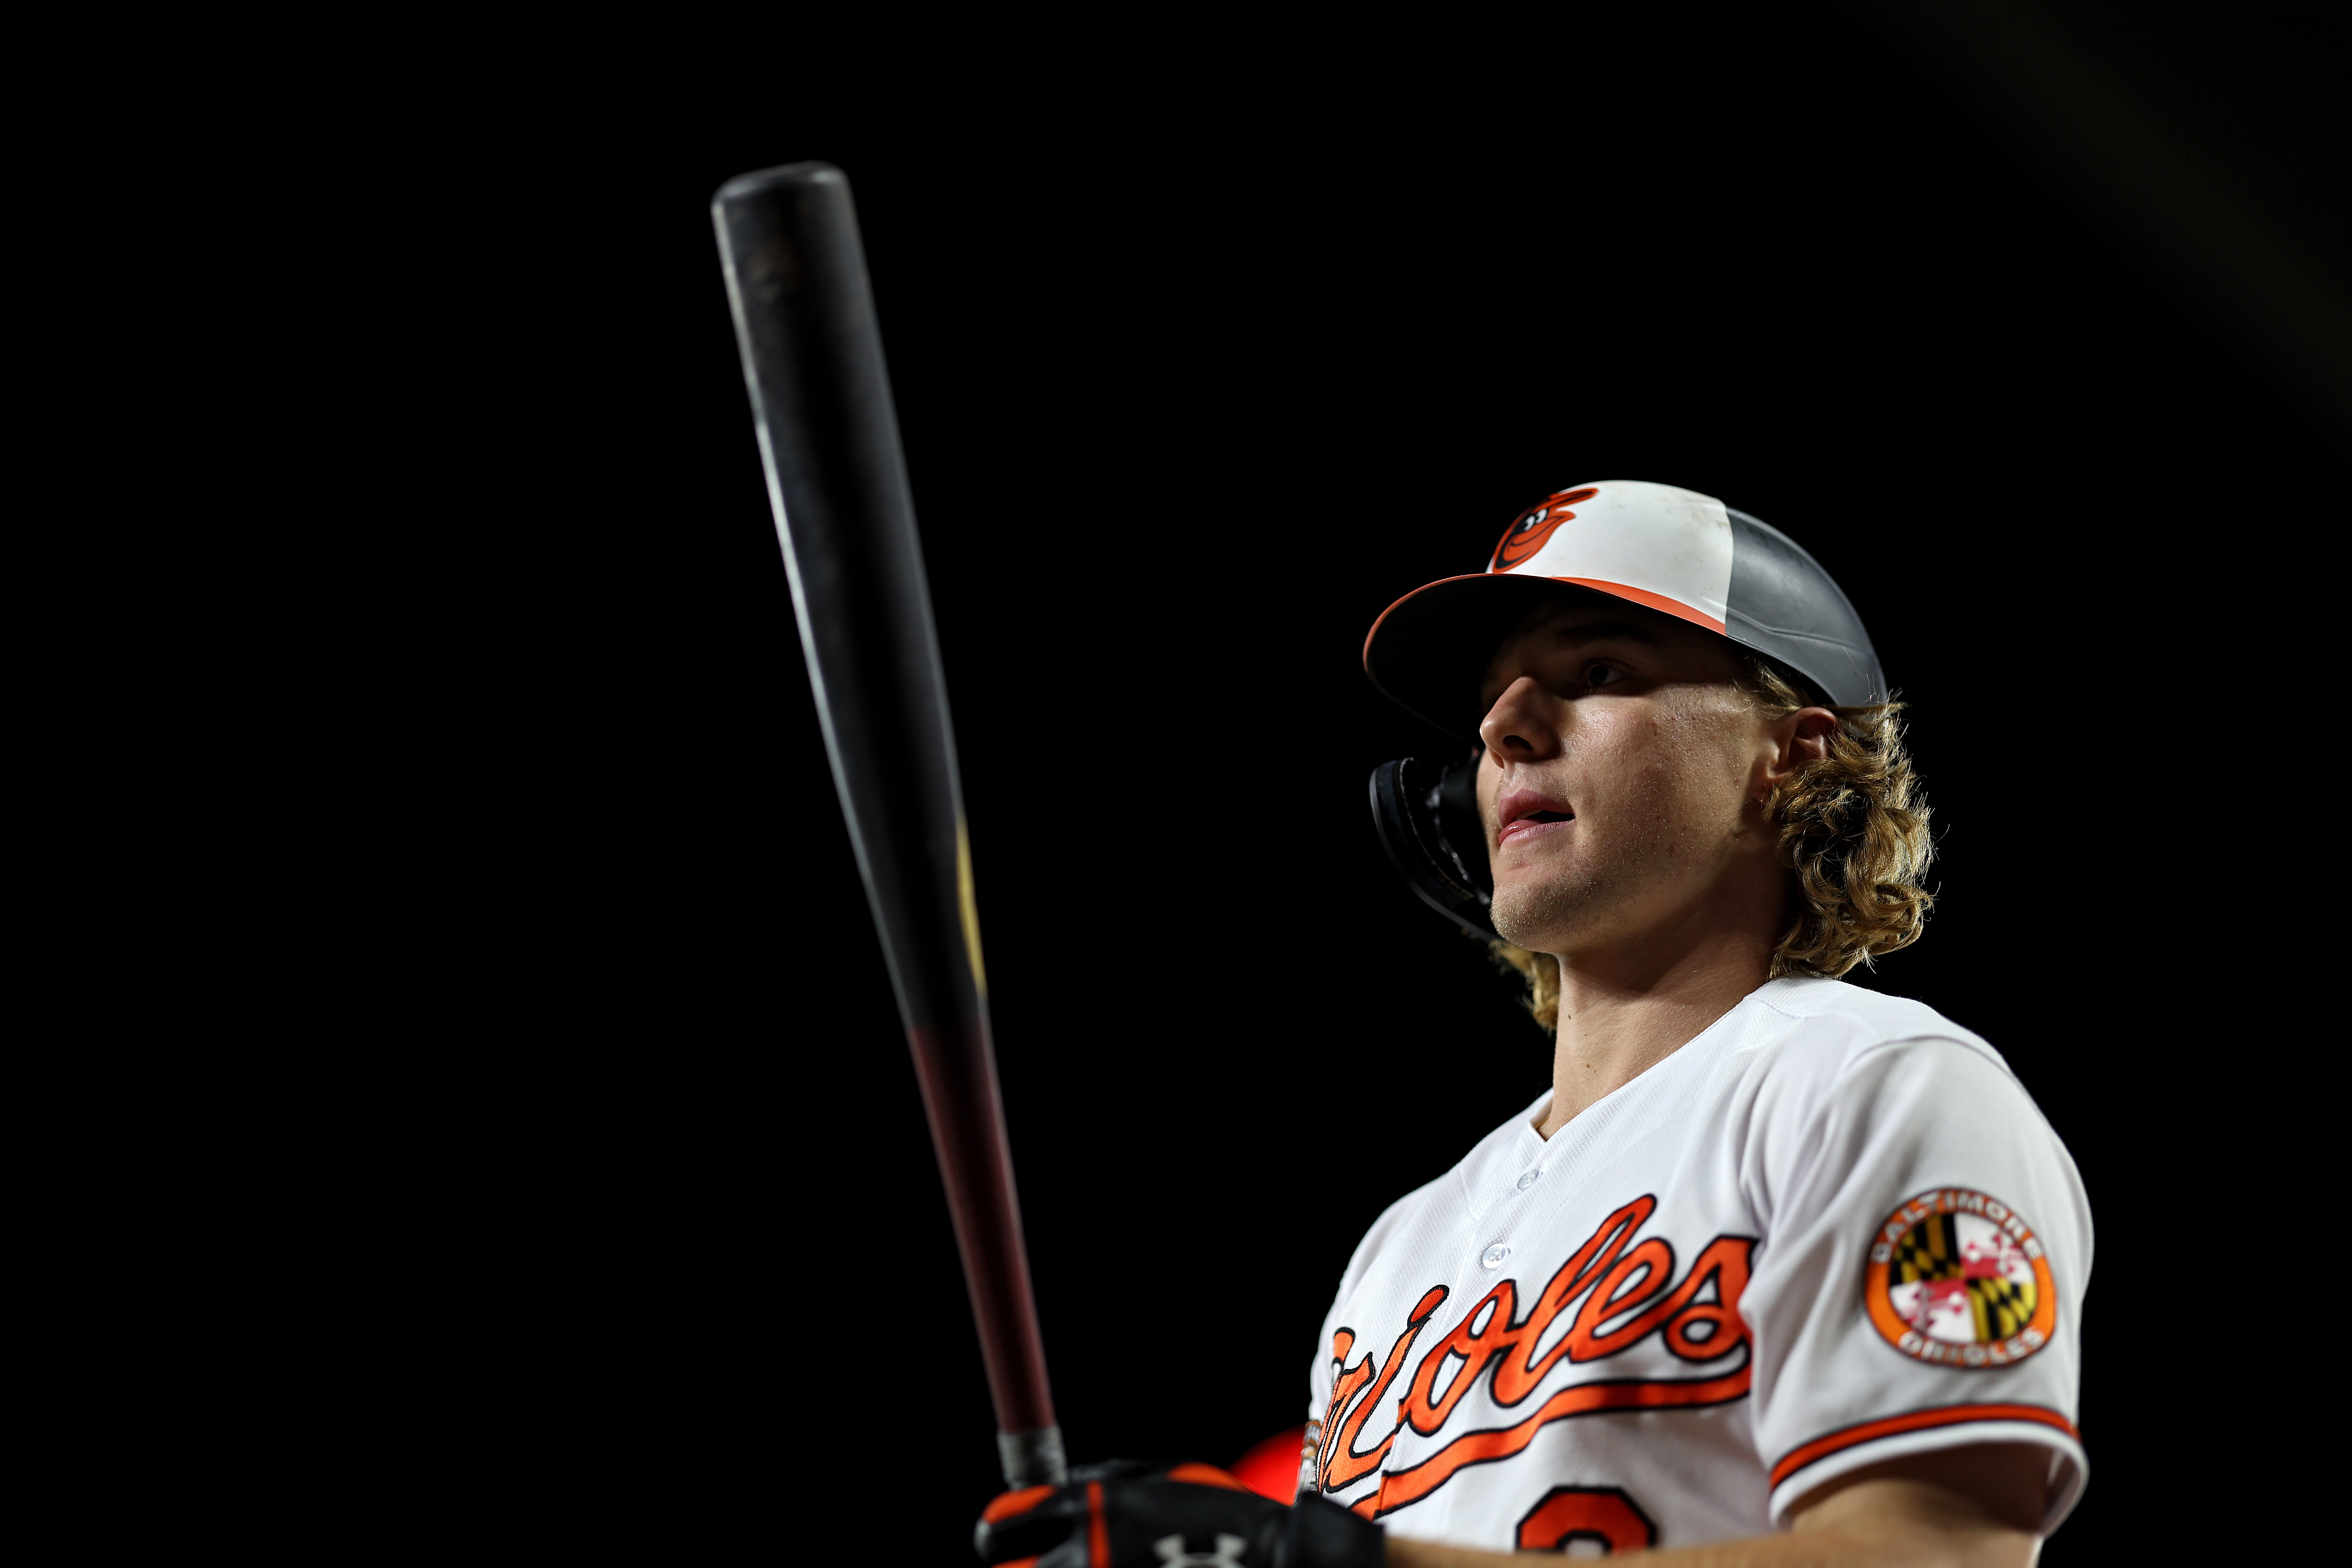 Baltimore Orioles have made one of baseball's greatest 2-year